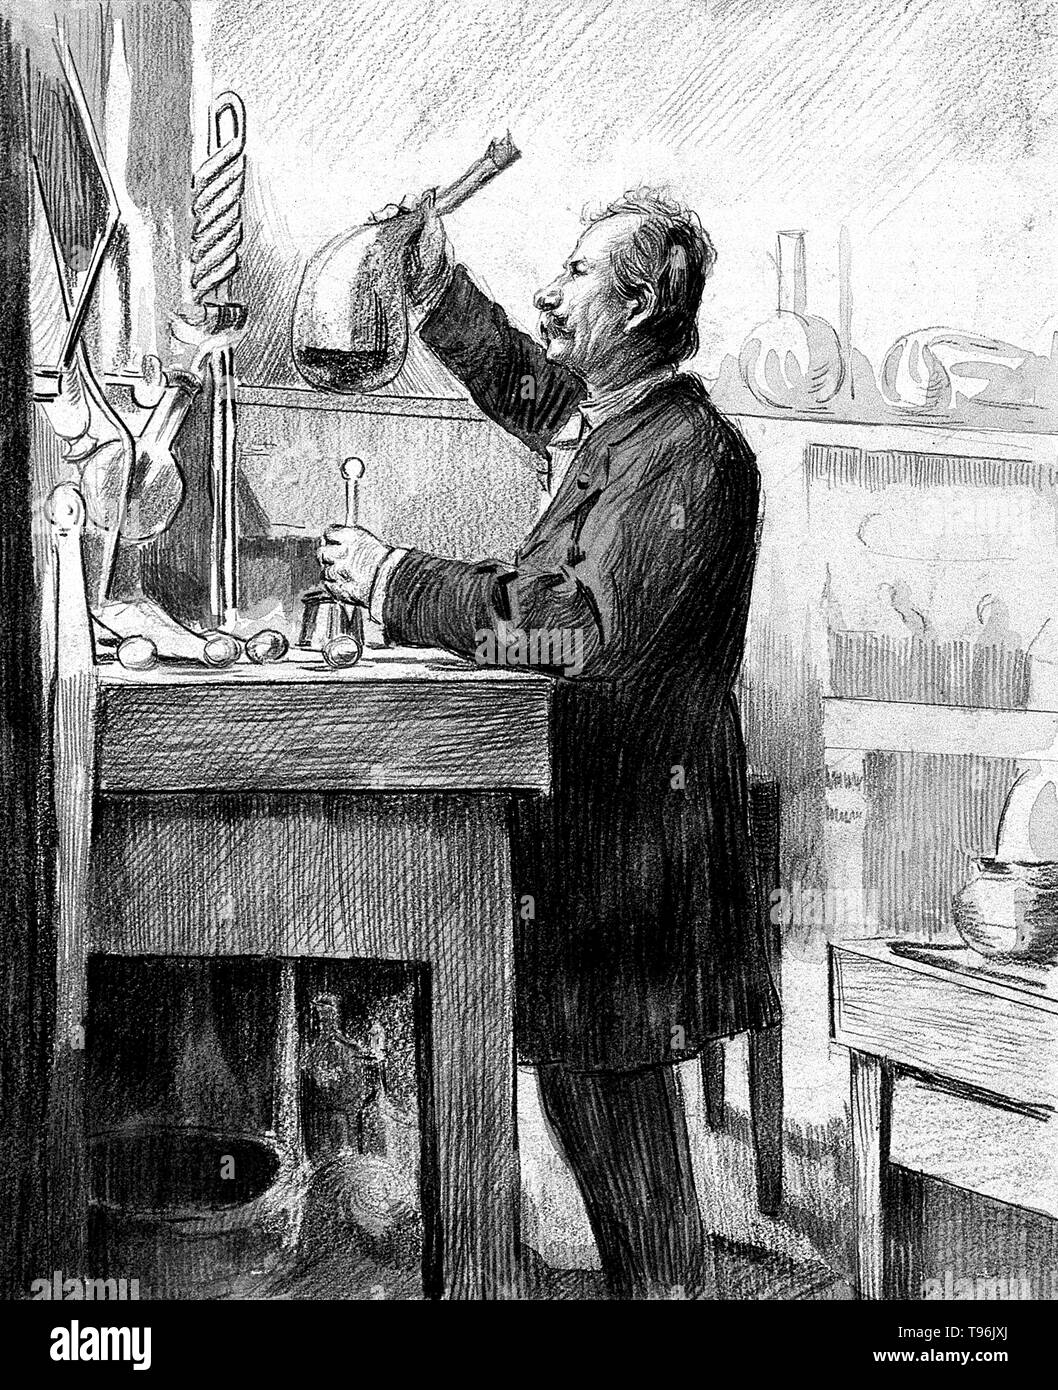 Pierre Eugène Marcellin Berthelot (October 25, 1827 - March 18, 1907) was a French chemist and politician noted for the Thomsen-Berthelot principle of thermochemistry which argued that all chemical changes are accompanied by the production of heat and that processes which occur will be ones in which the most heat is produced. He synthesized many organic compounds from inorganic substances and disproved the theory of vitalism. He is considered as one of the greatest chemists of all time. Stock Photo